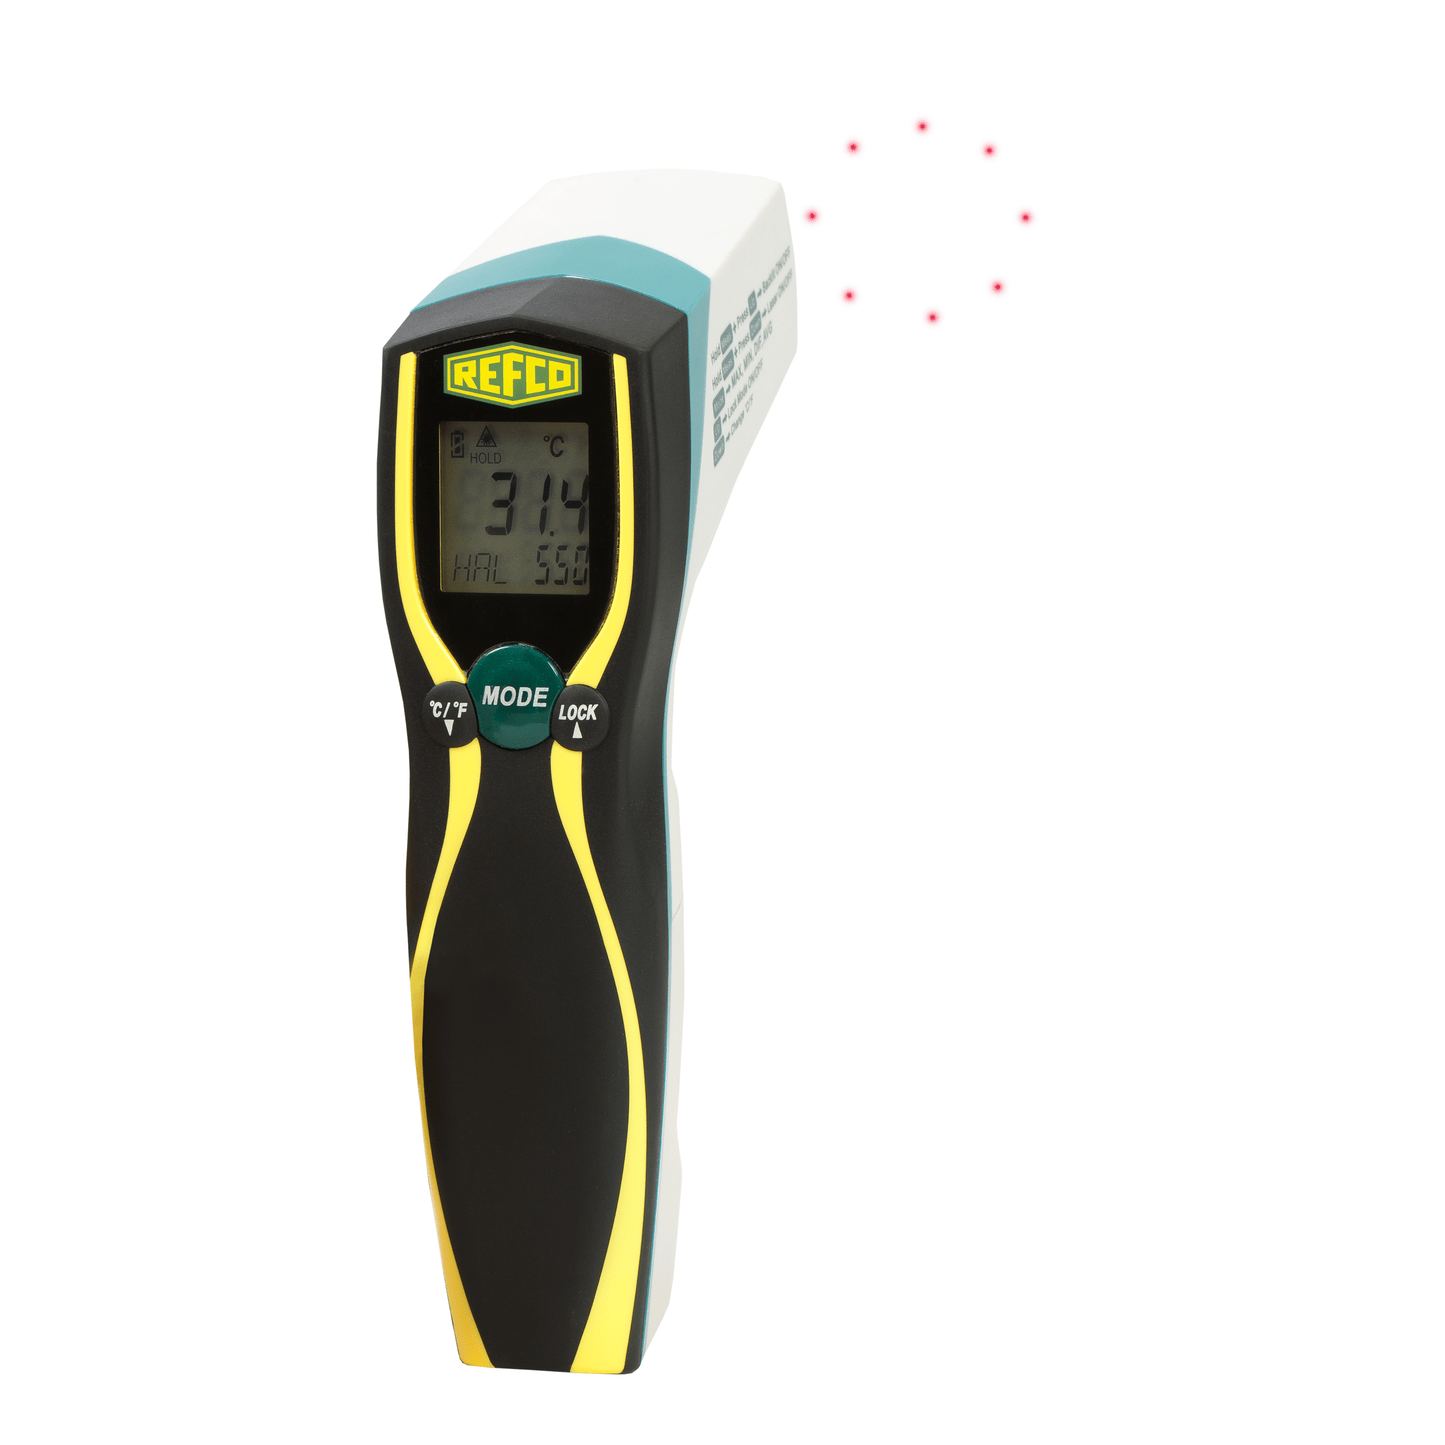 Refco LP-88 Infrared Thermometer